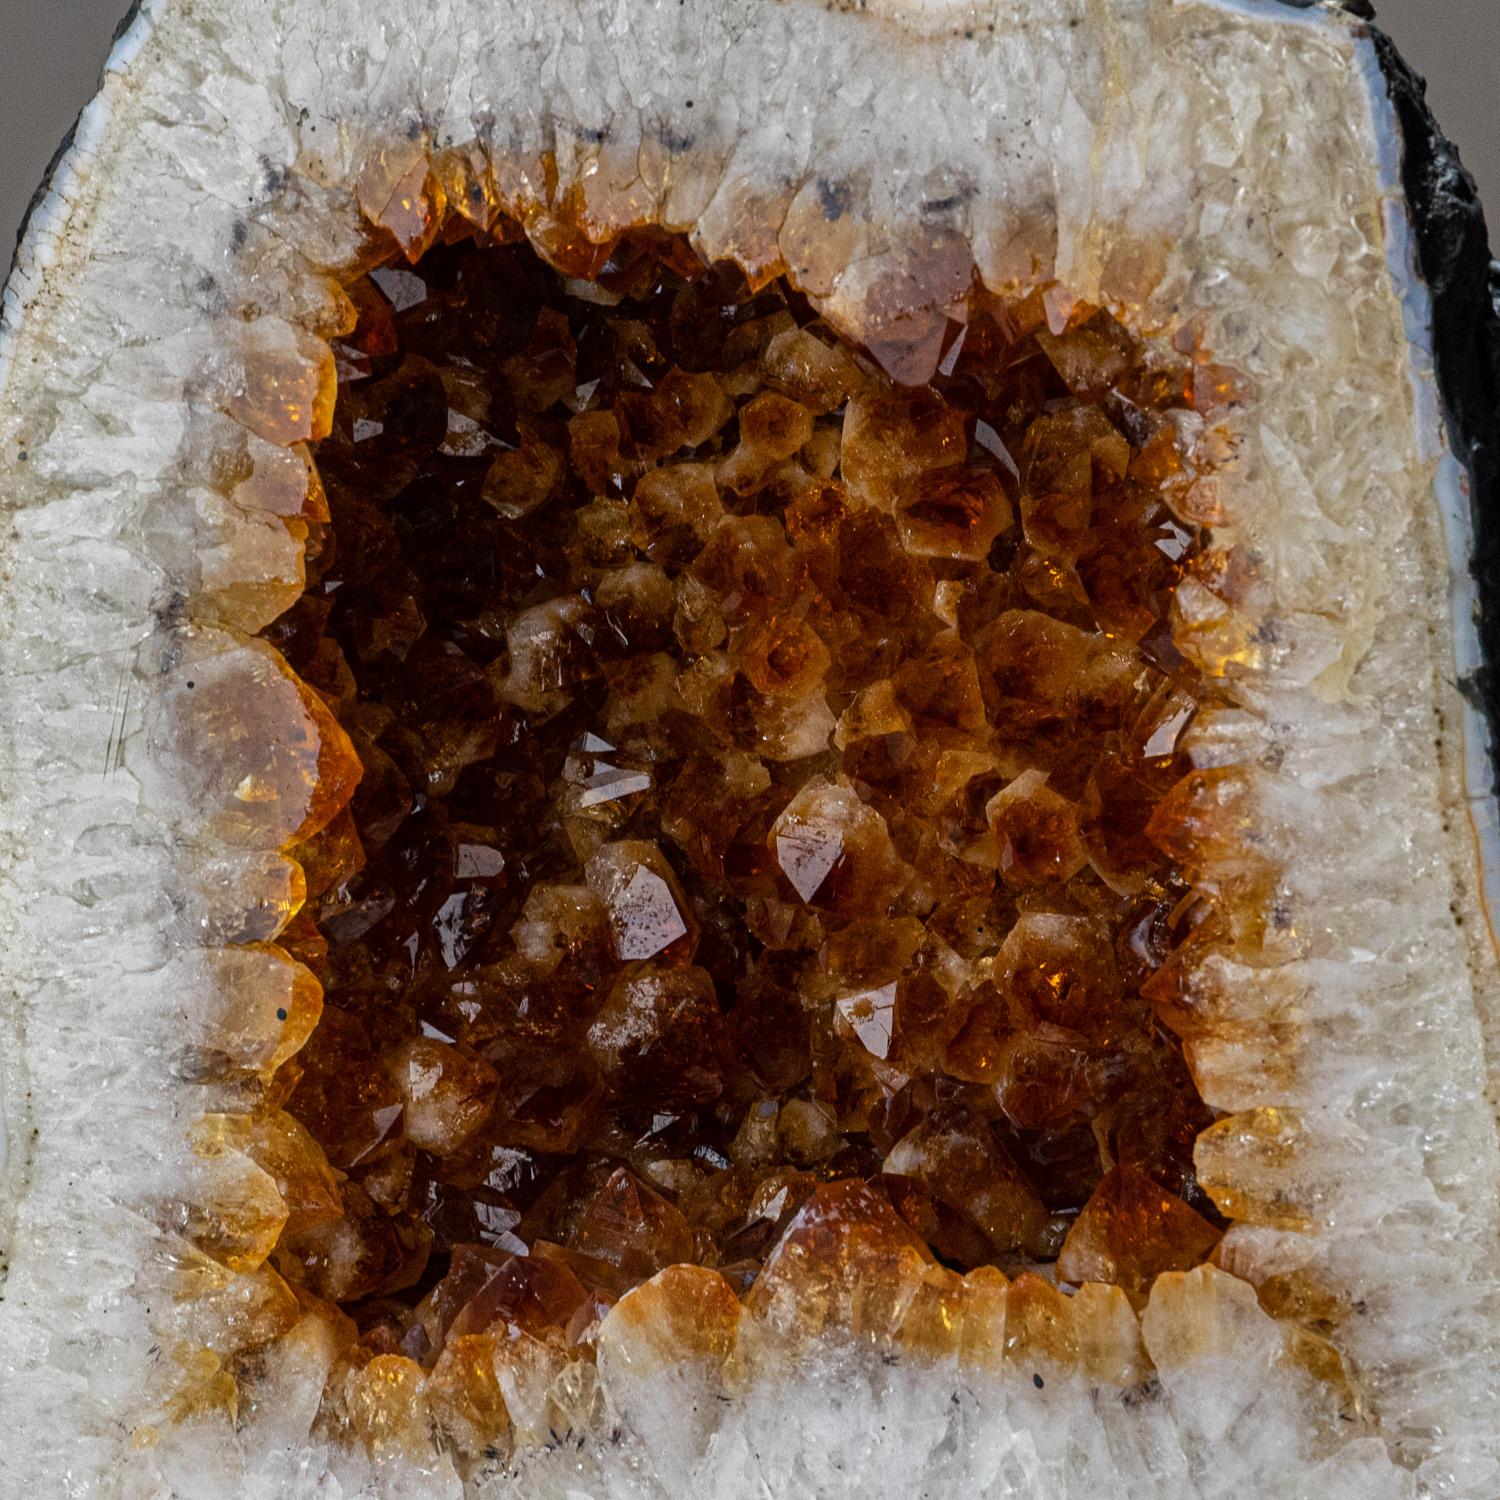 AAA museum quality, large Brazilian citrine geode lined with extra large lustrous, transparent to translucent, golden citrine quartz crystals. This beautiful specimen has vibrant orange/yellow color with highly reflective terminated faces.

Sunny